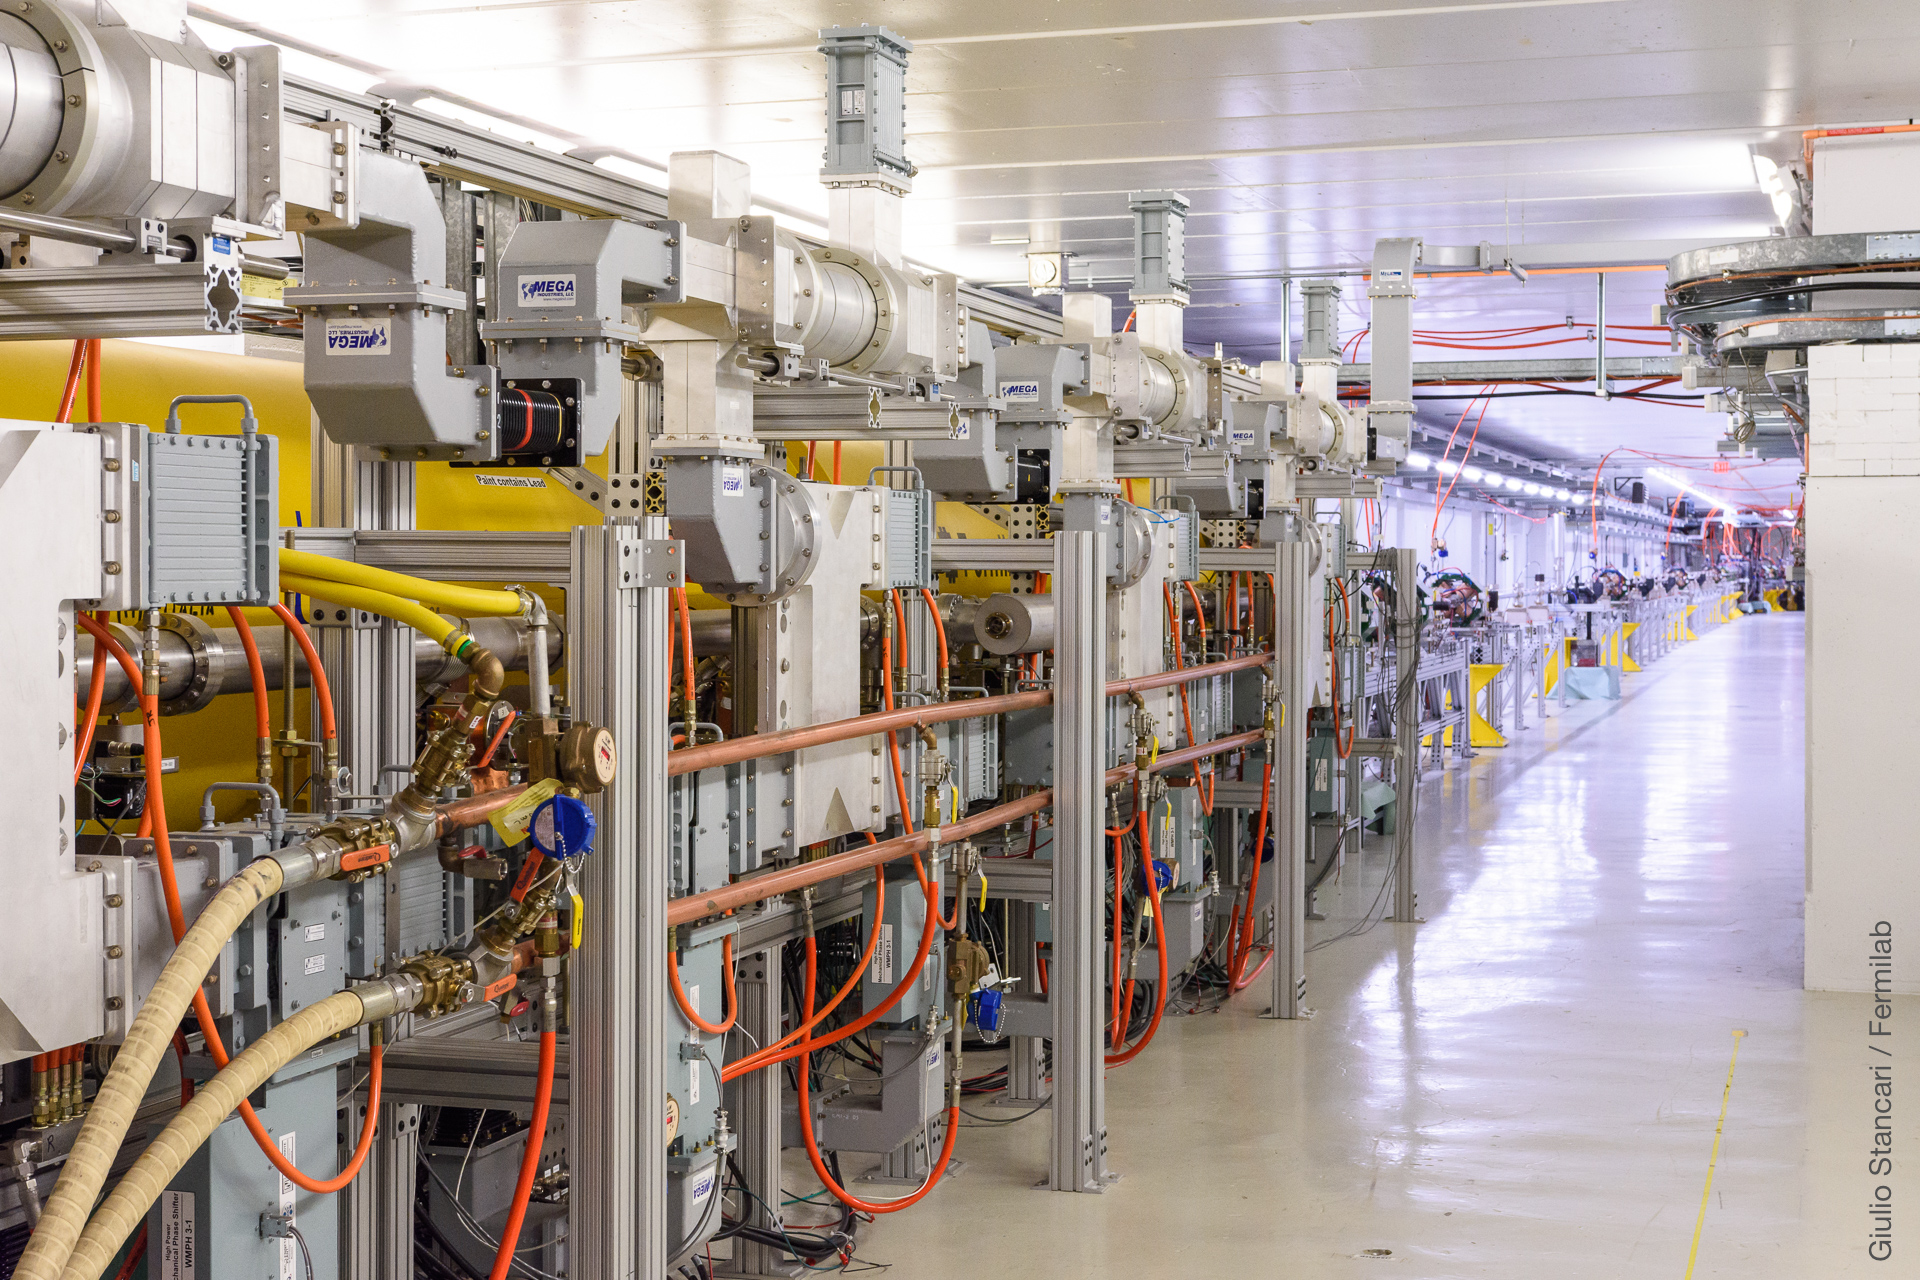 The FAST Linac in May 2019